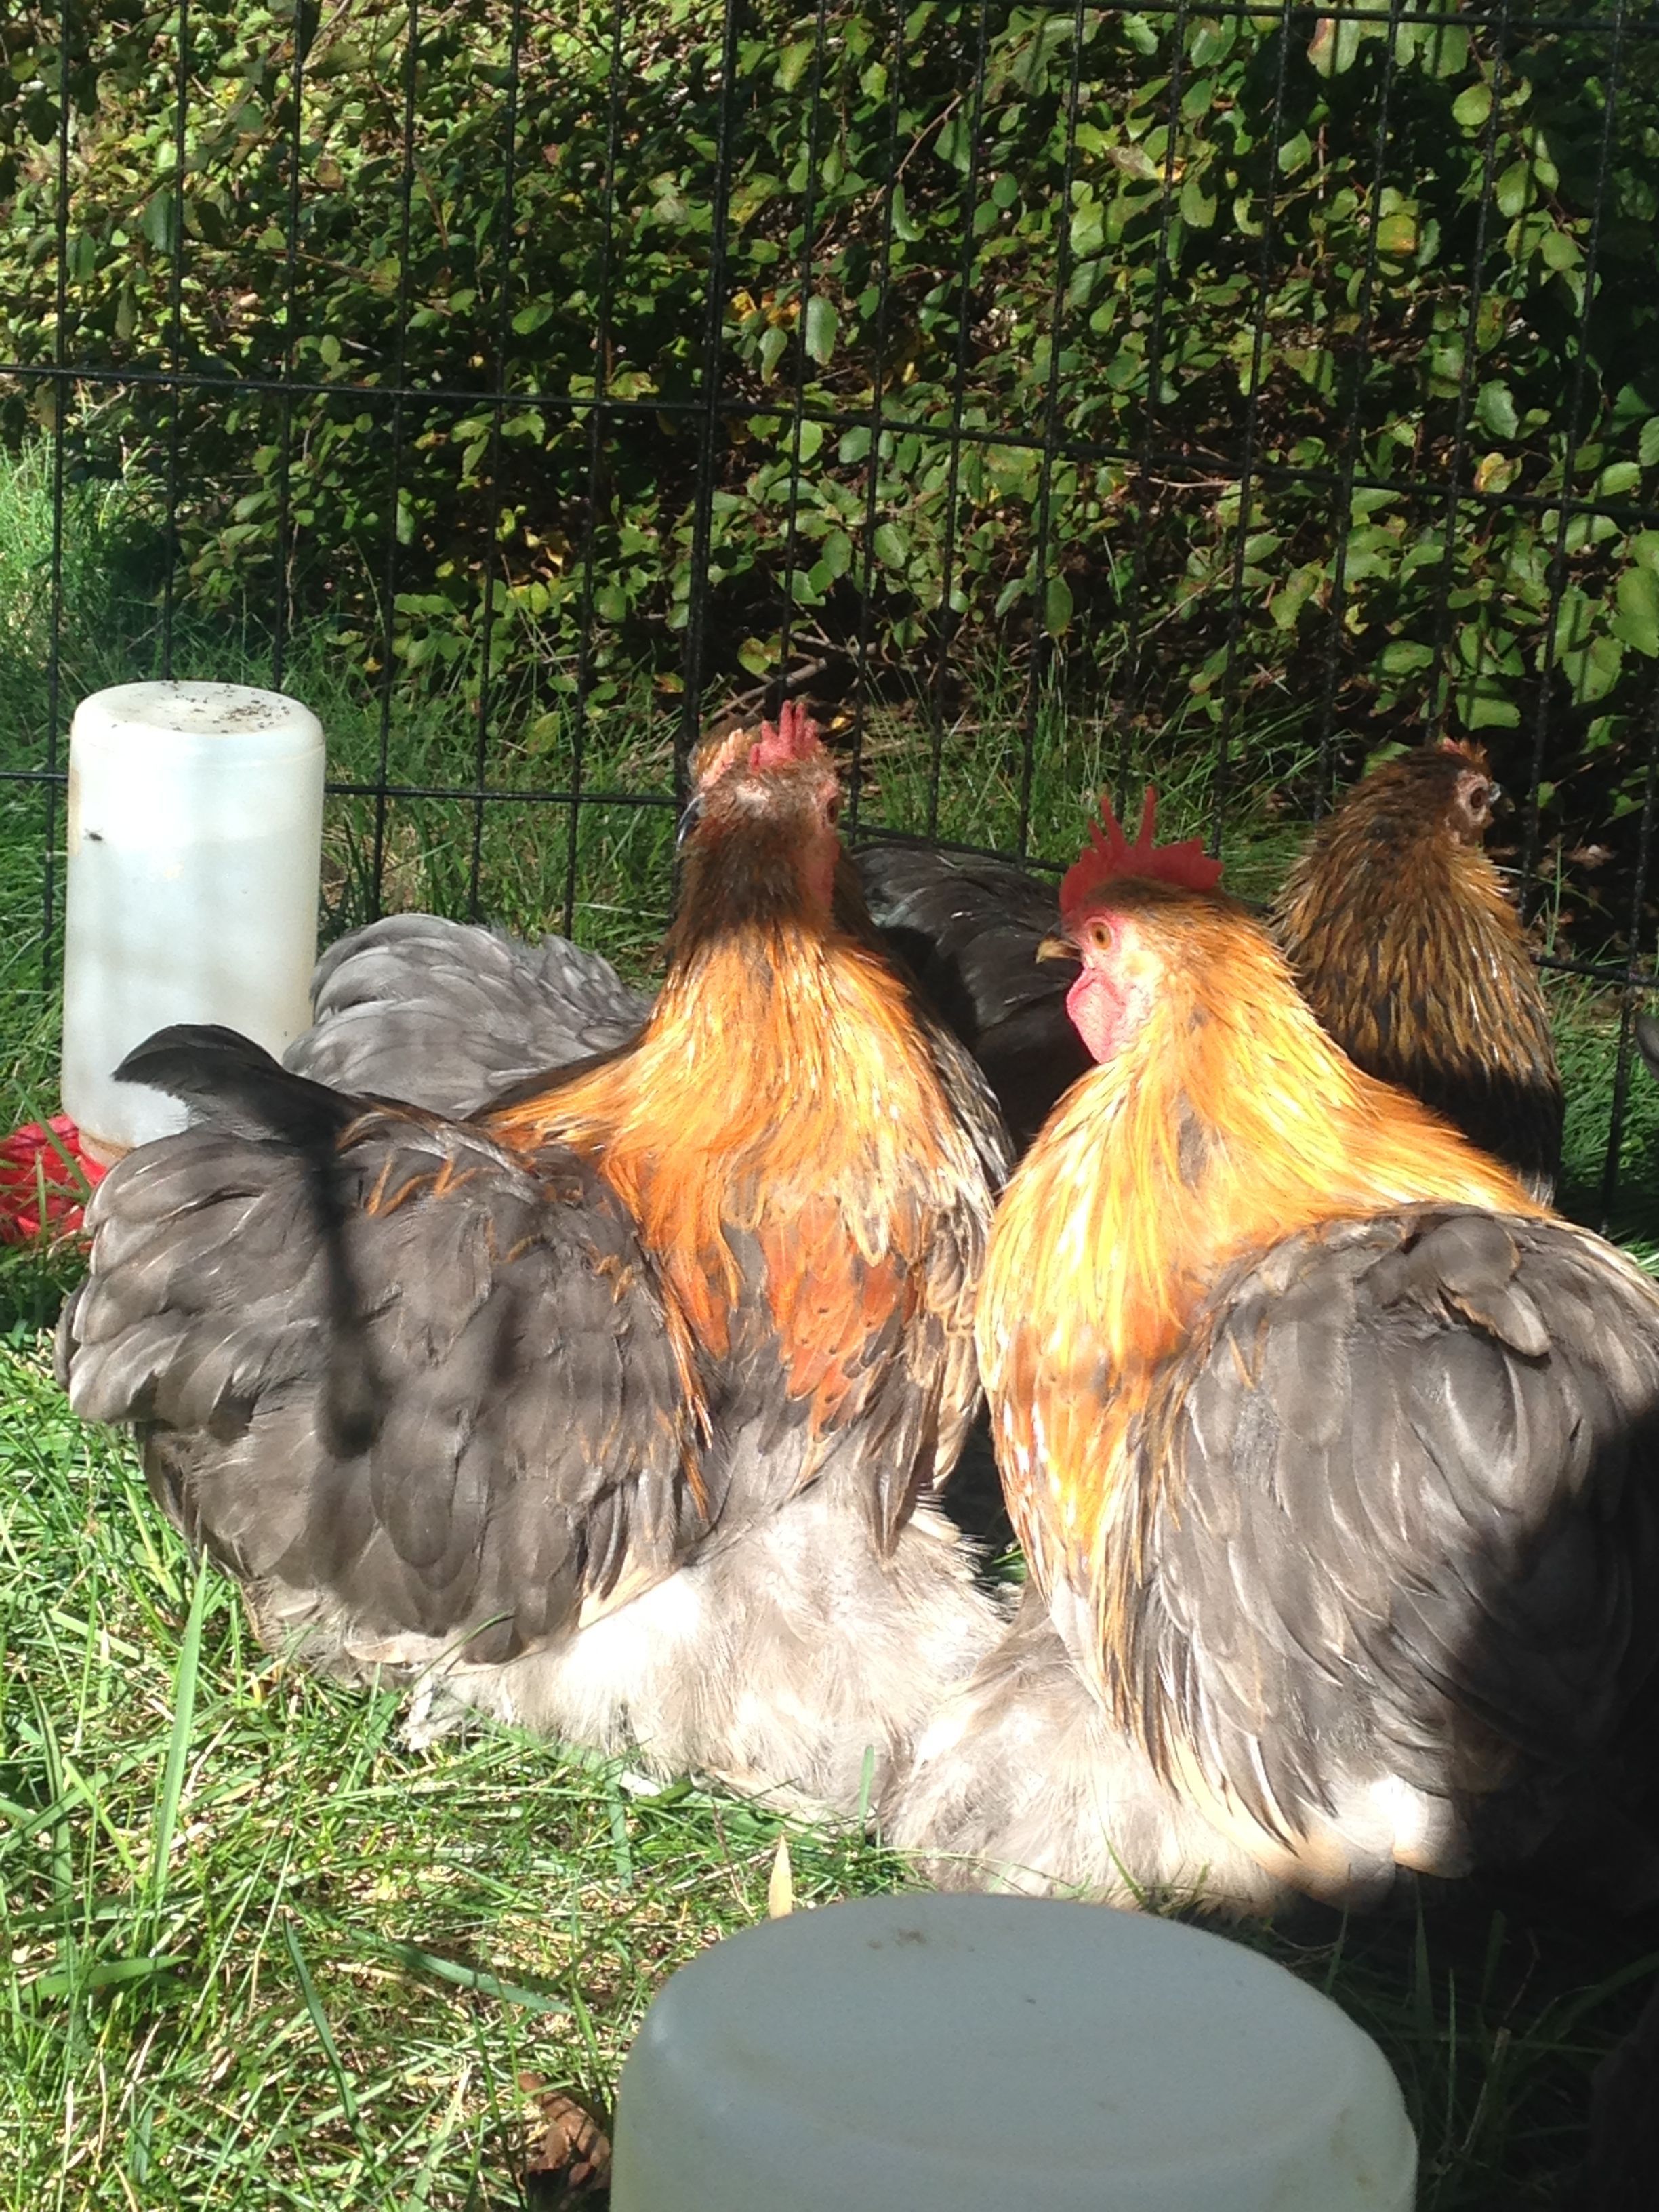 Two of the young grow-out roosters, from shipped eggs so unrelated to most of the other youngsters.